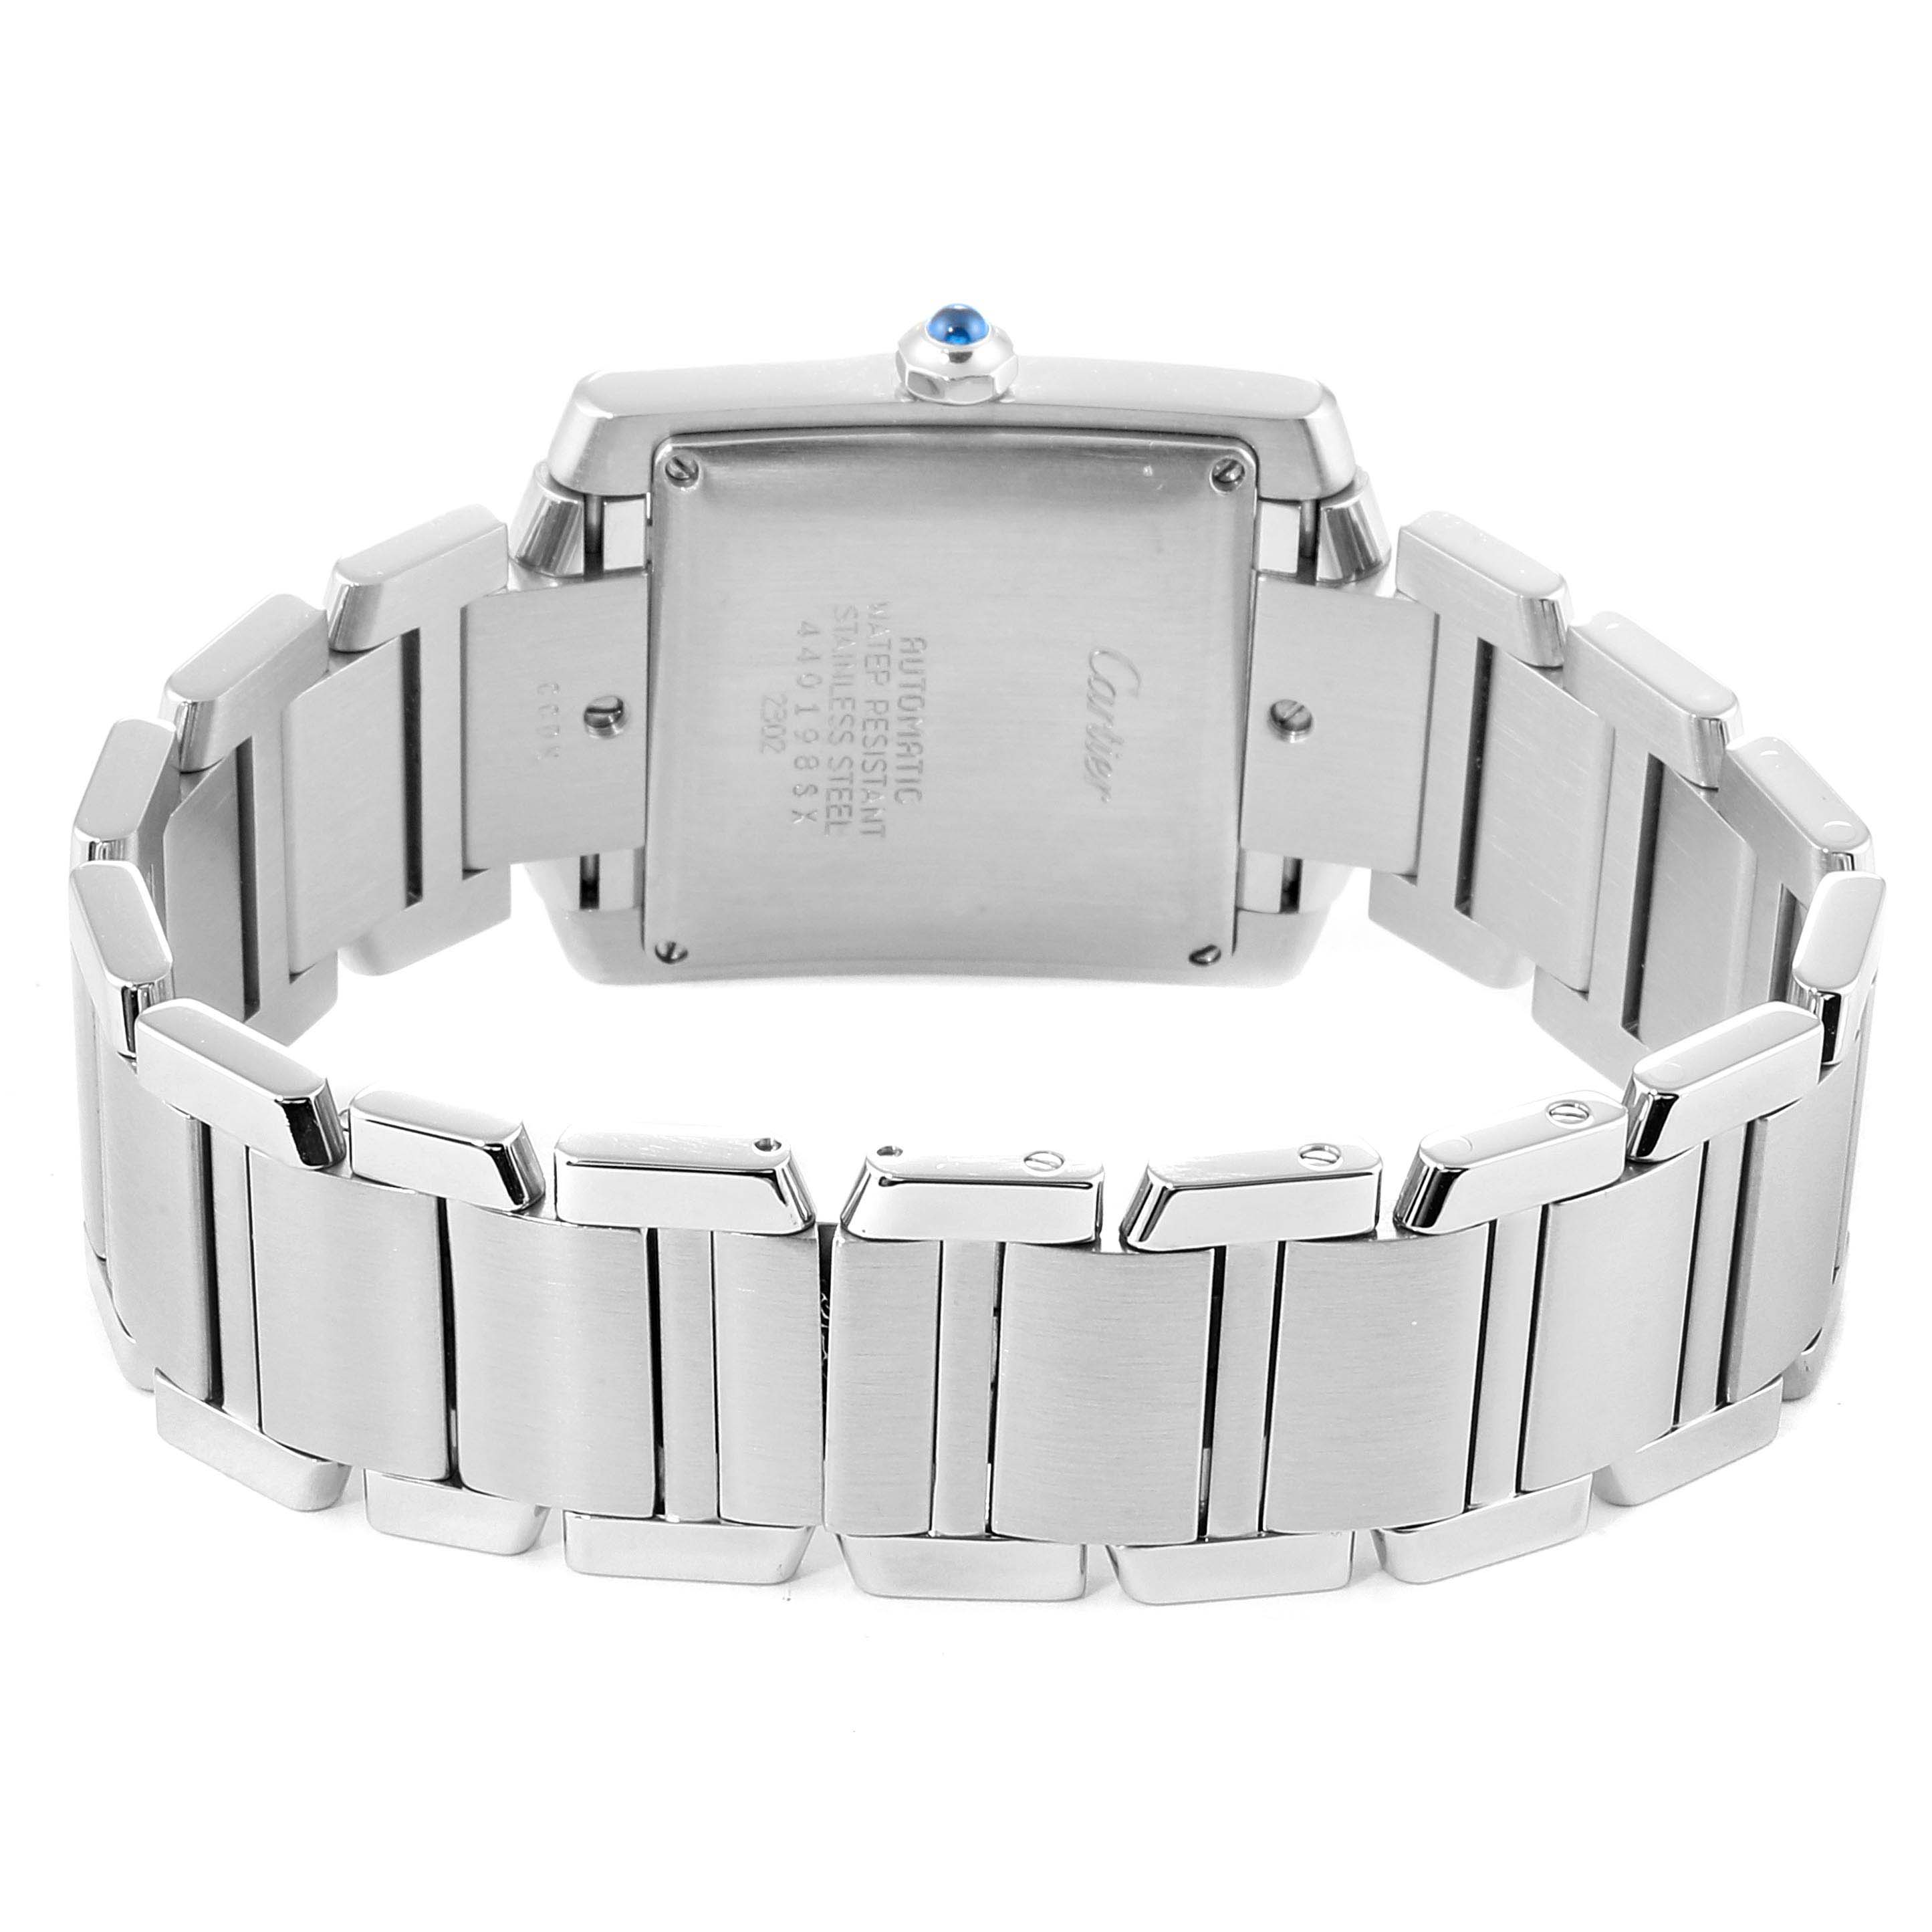 Cartier Tank Francaise Silver Dial Automatic Steel Mens Watch W51002Q3 ...